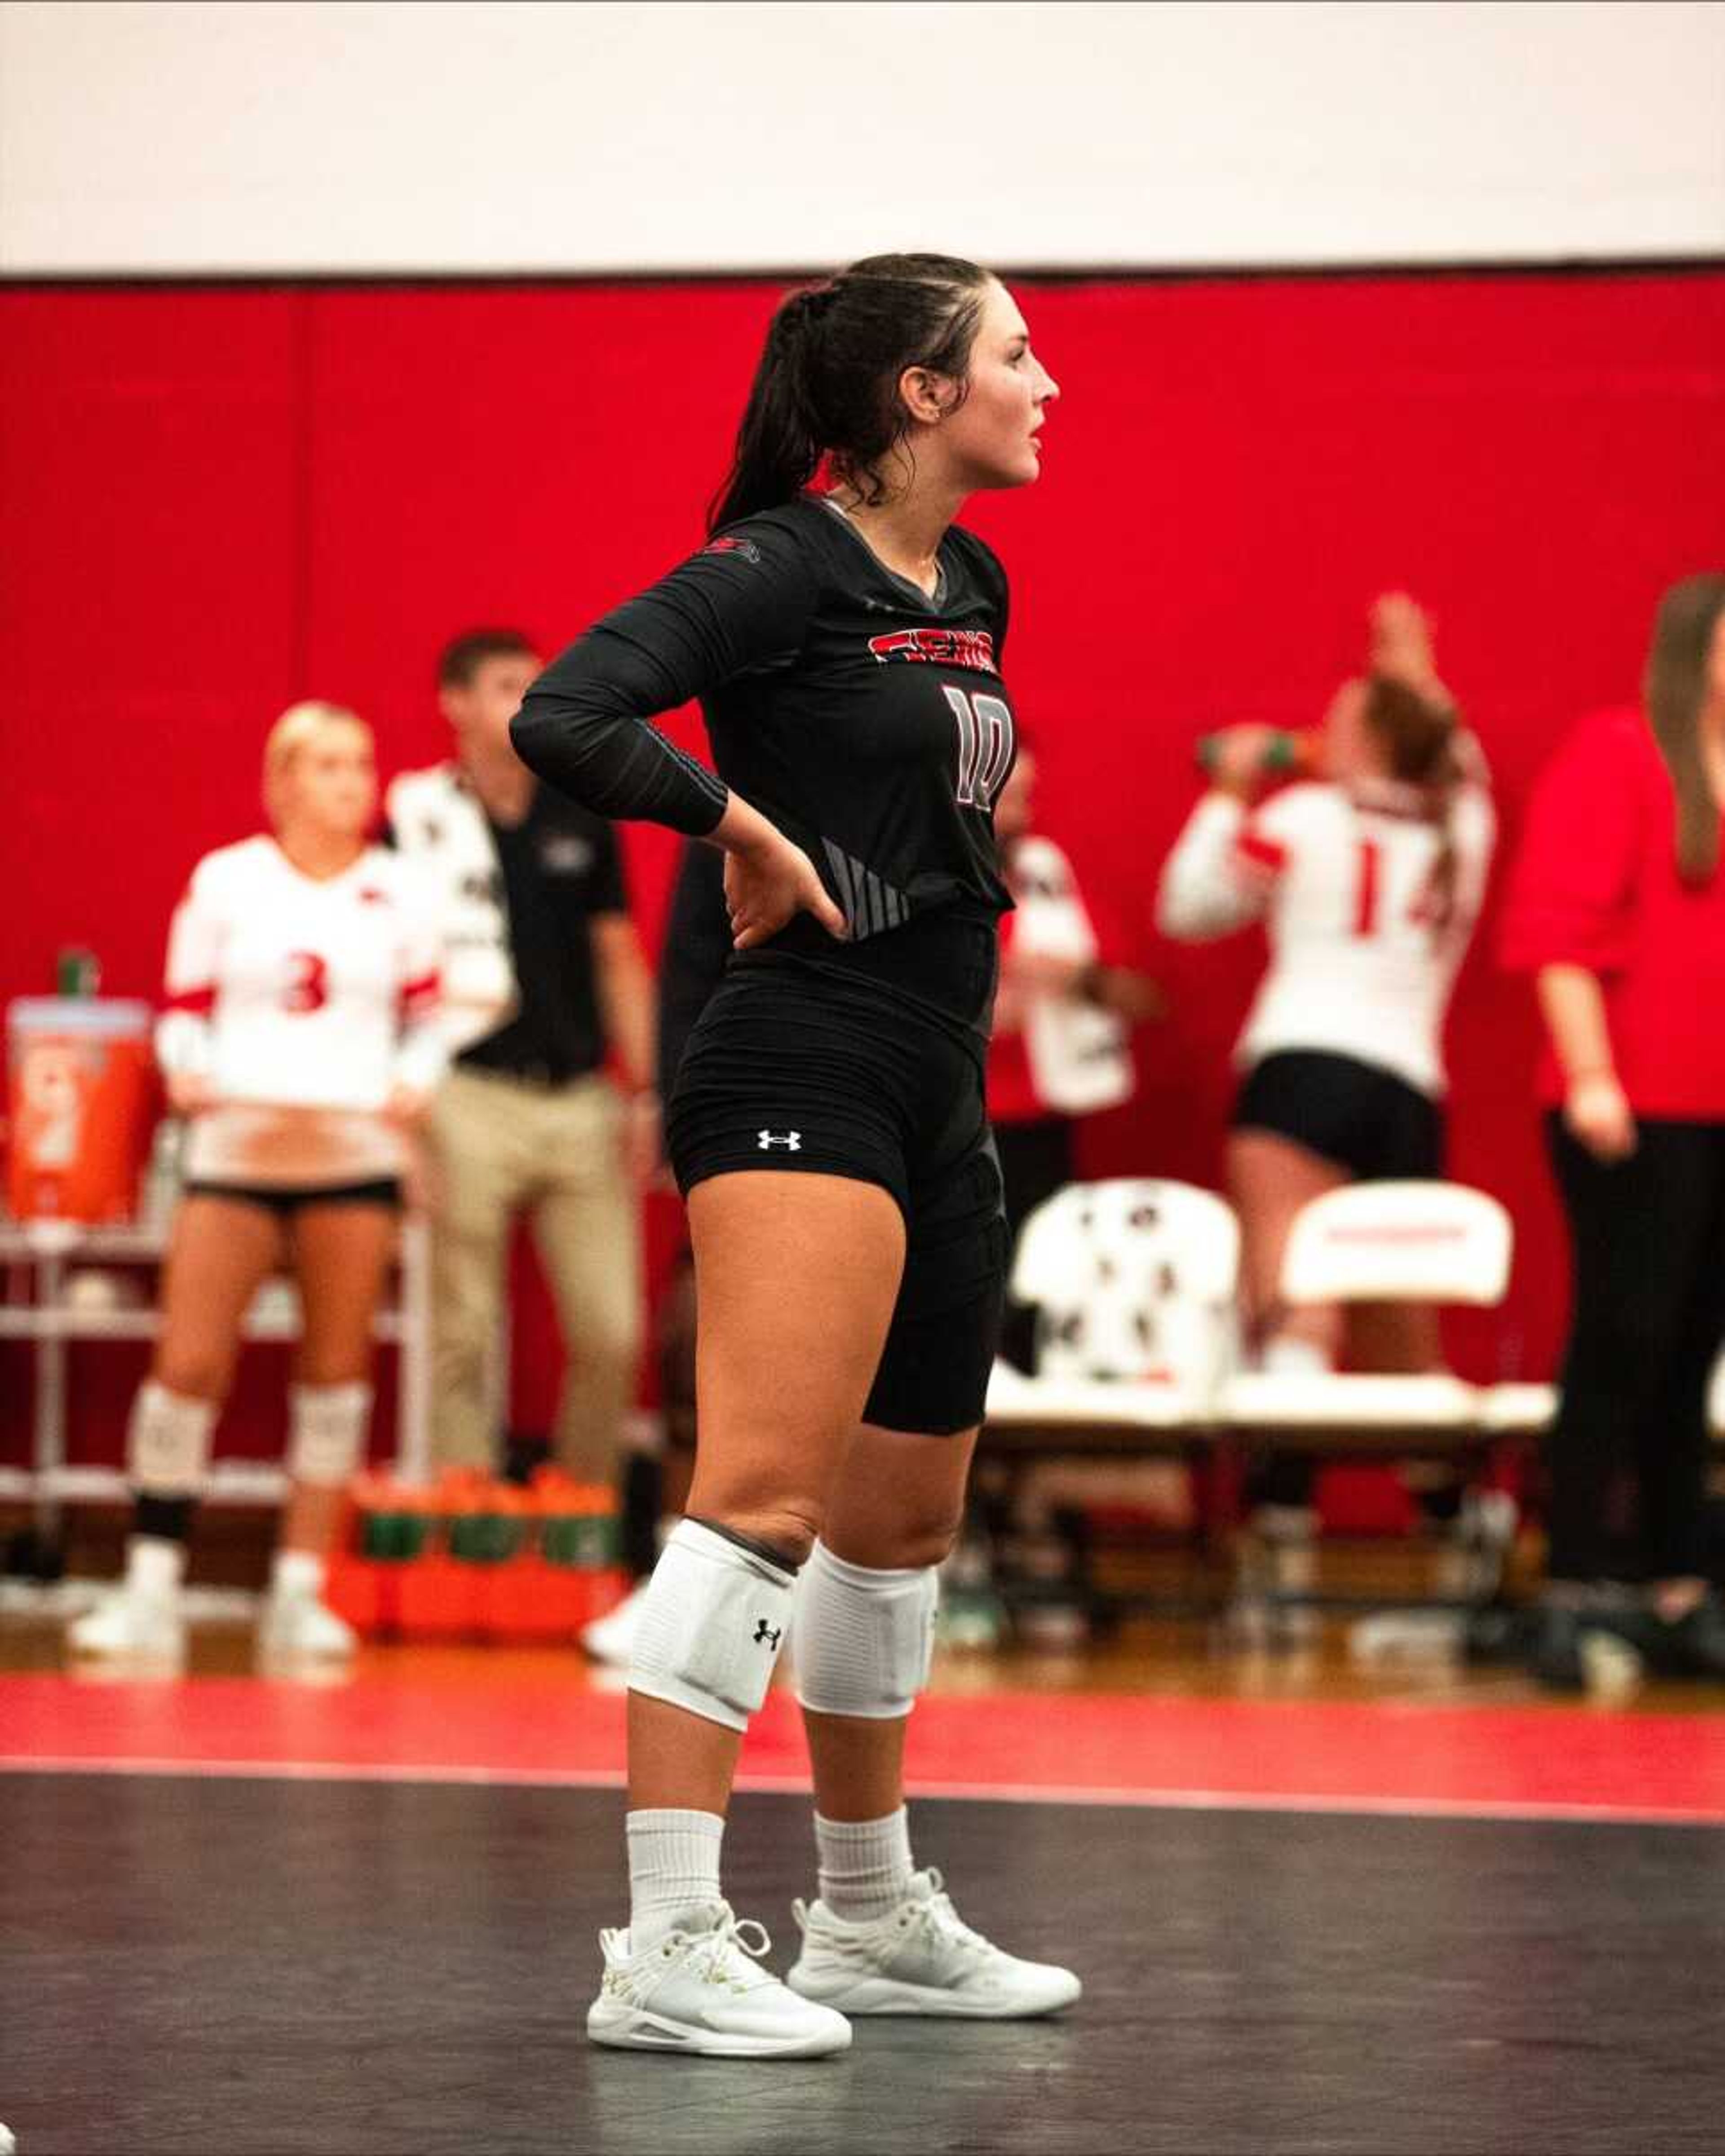 Redhawks senior libero Tara Beilsmith looks on at her opponents during a home match. Beilsmith won the 2022 OVC Defensive Player of the Year Award after posting a career-high in digs and digs per set.